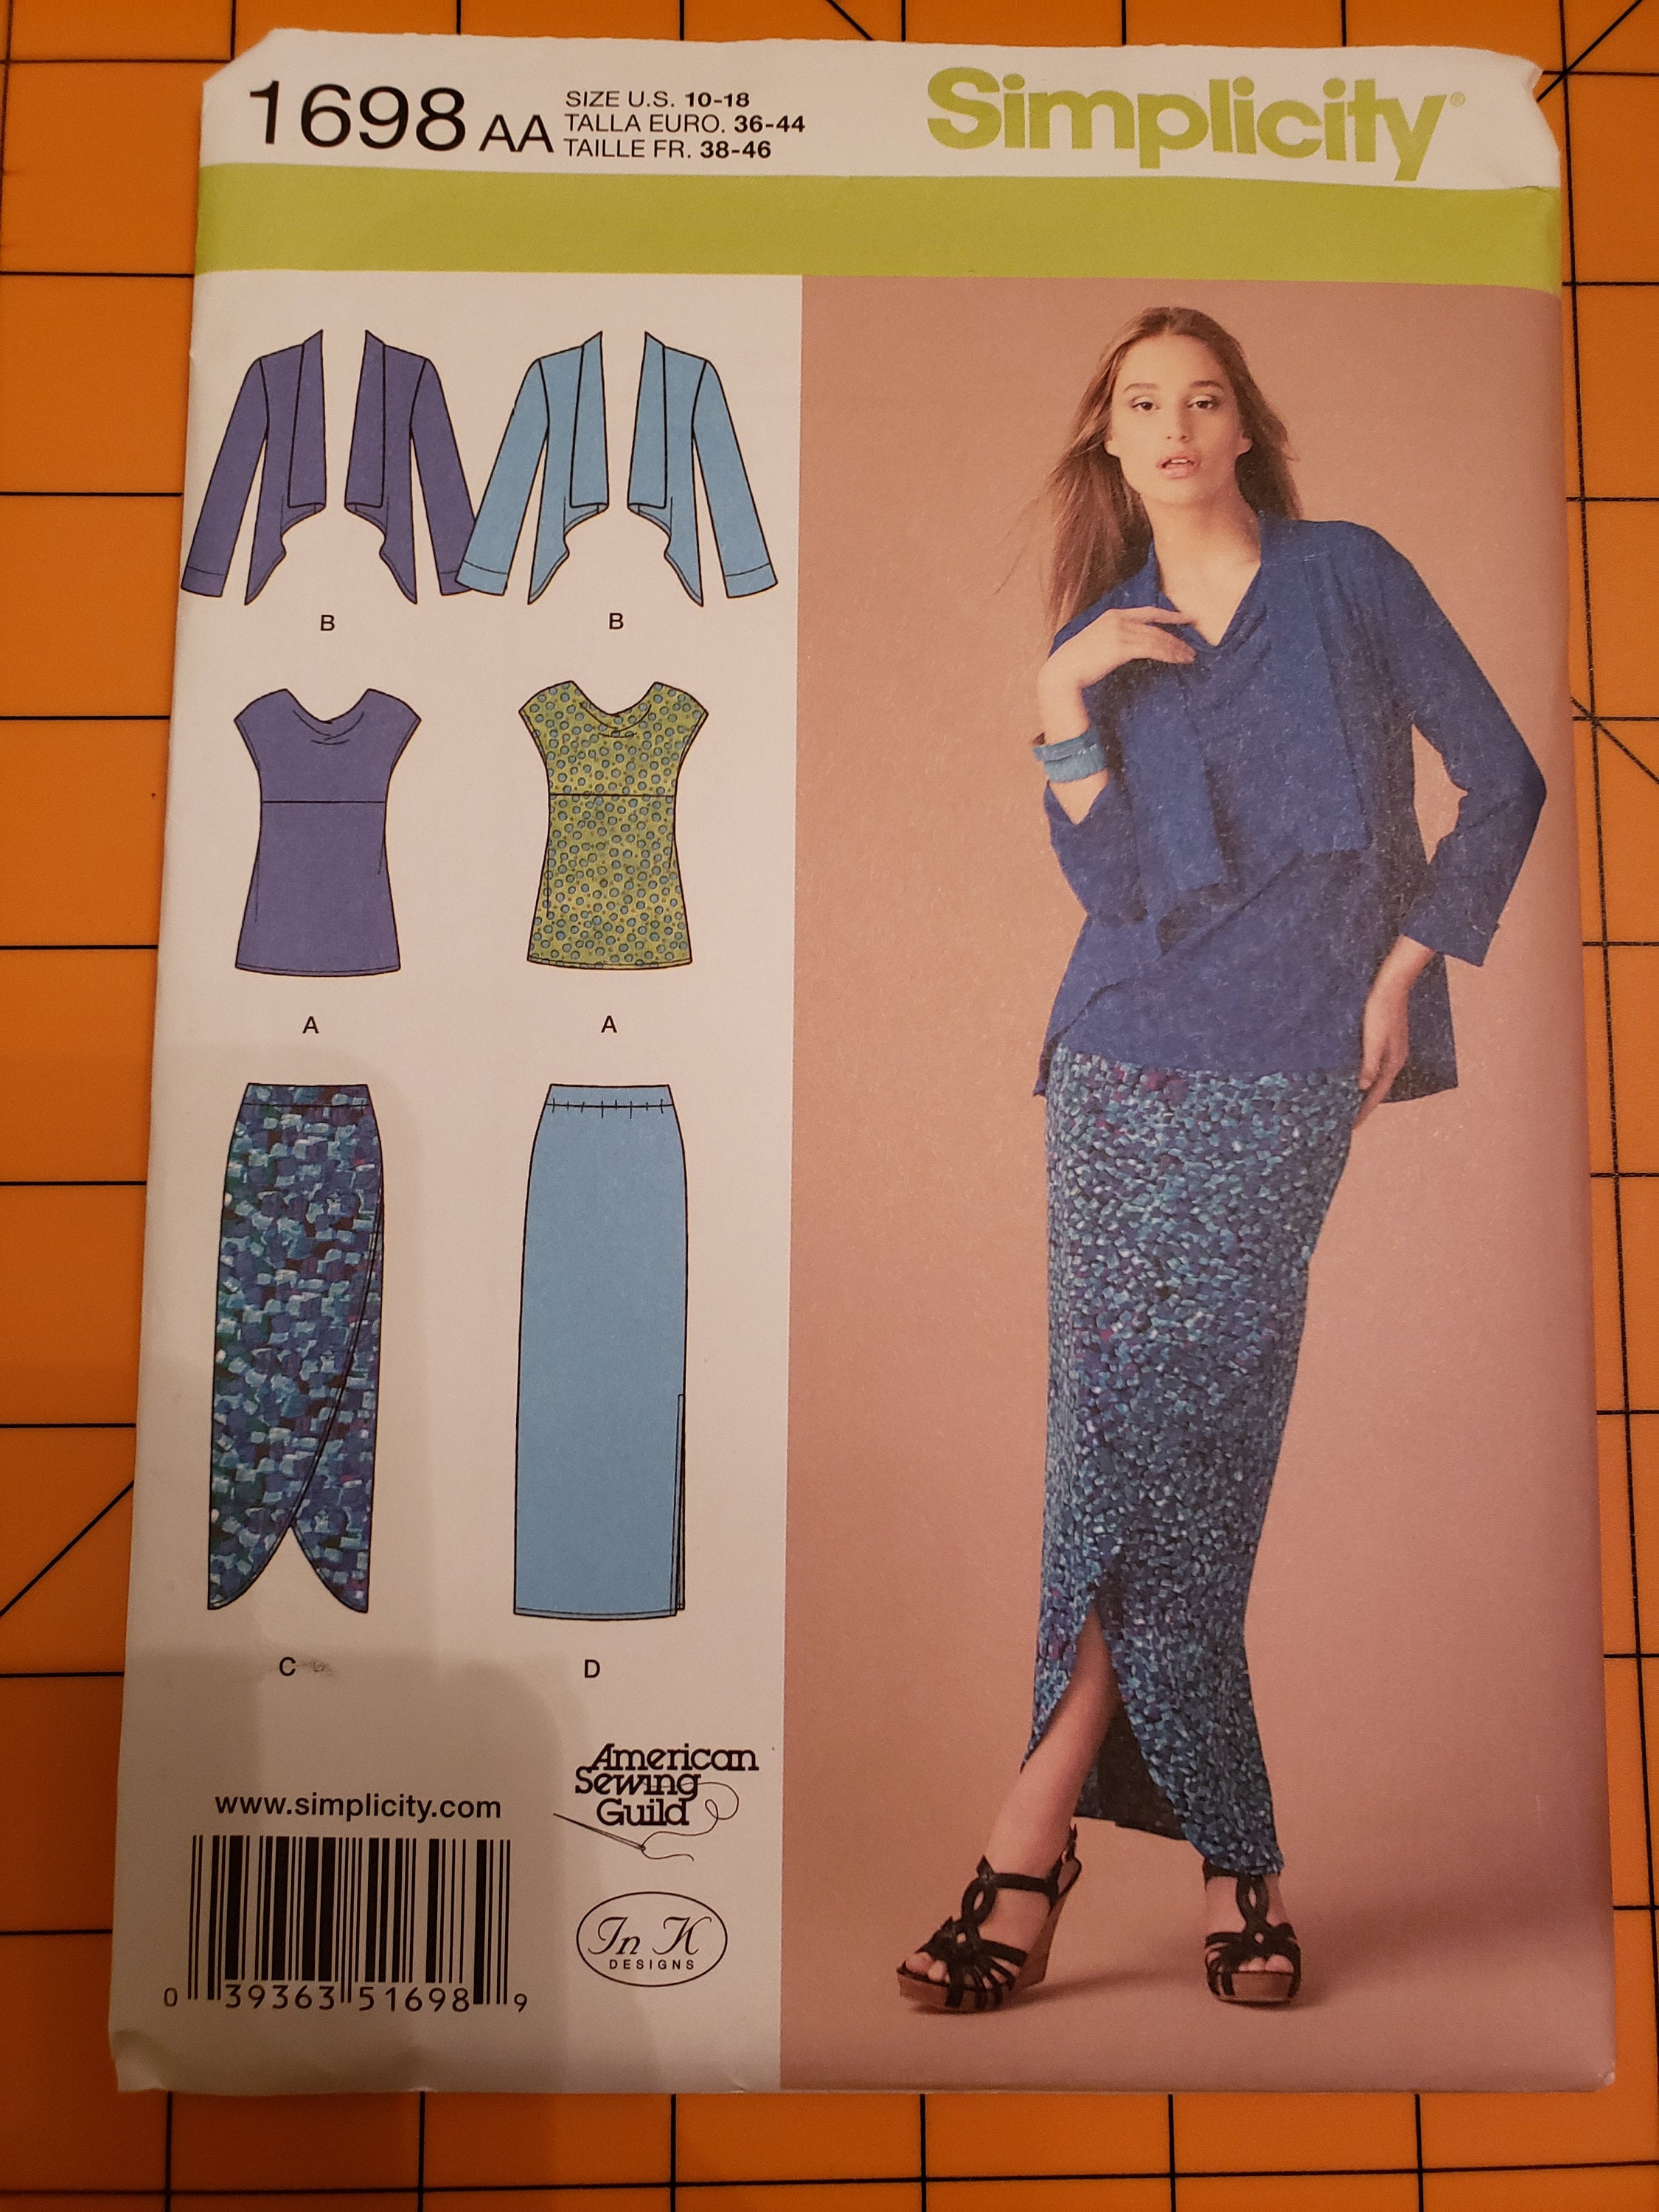 Simplicity 1698 Misses Knit Separates Pullover Top, Jacket, Skirts